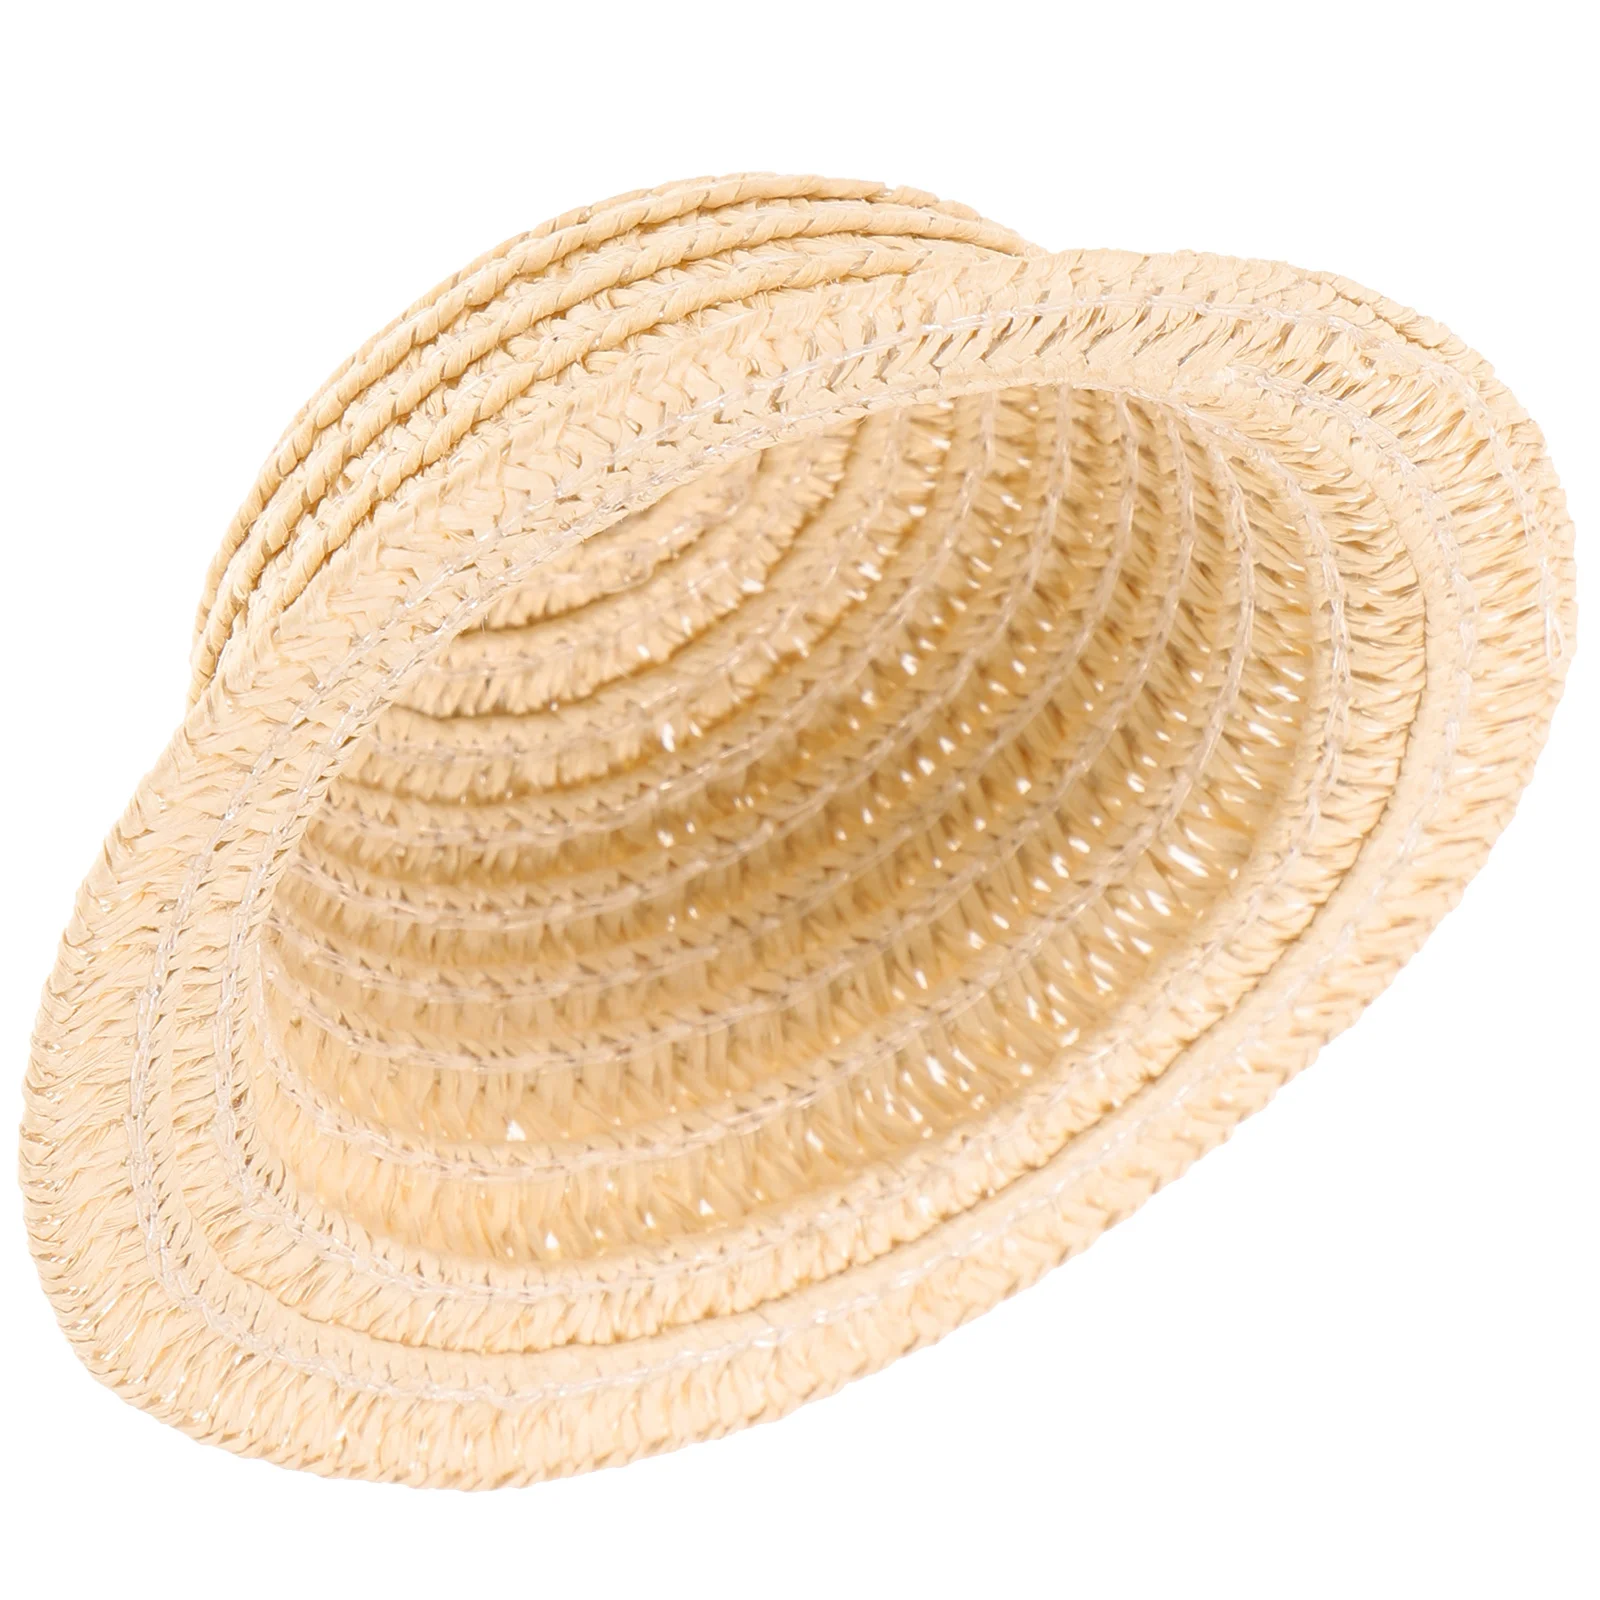 Straw Hat Mini DIY Top Has Baby Weaving Craft Woven Decor House Ornament Adornment Model Crafts 2 pcs mini fire extinguisher metal pendants ornament alloy models photography props tiny house ornament squirrel landscaping